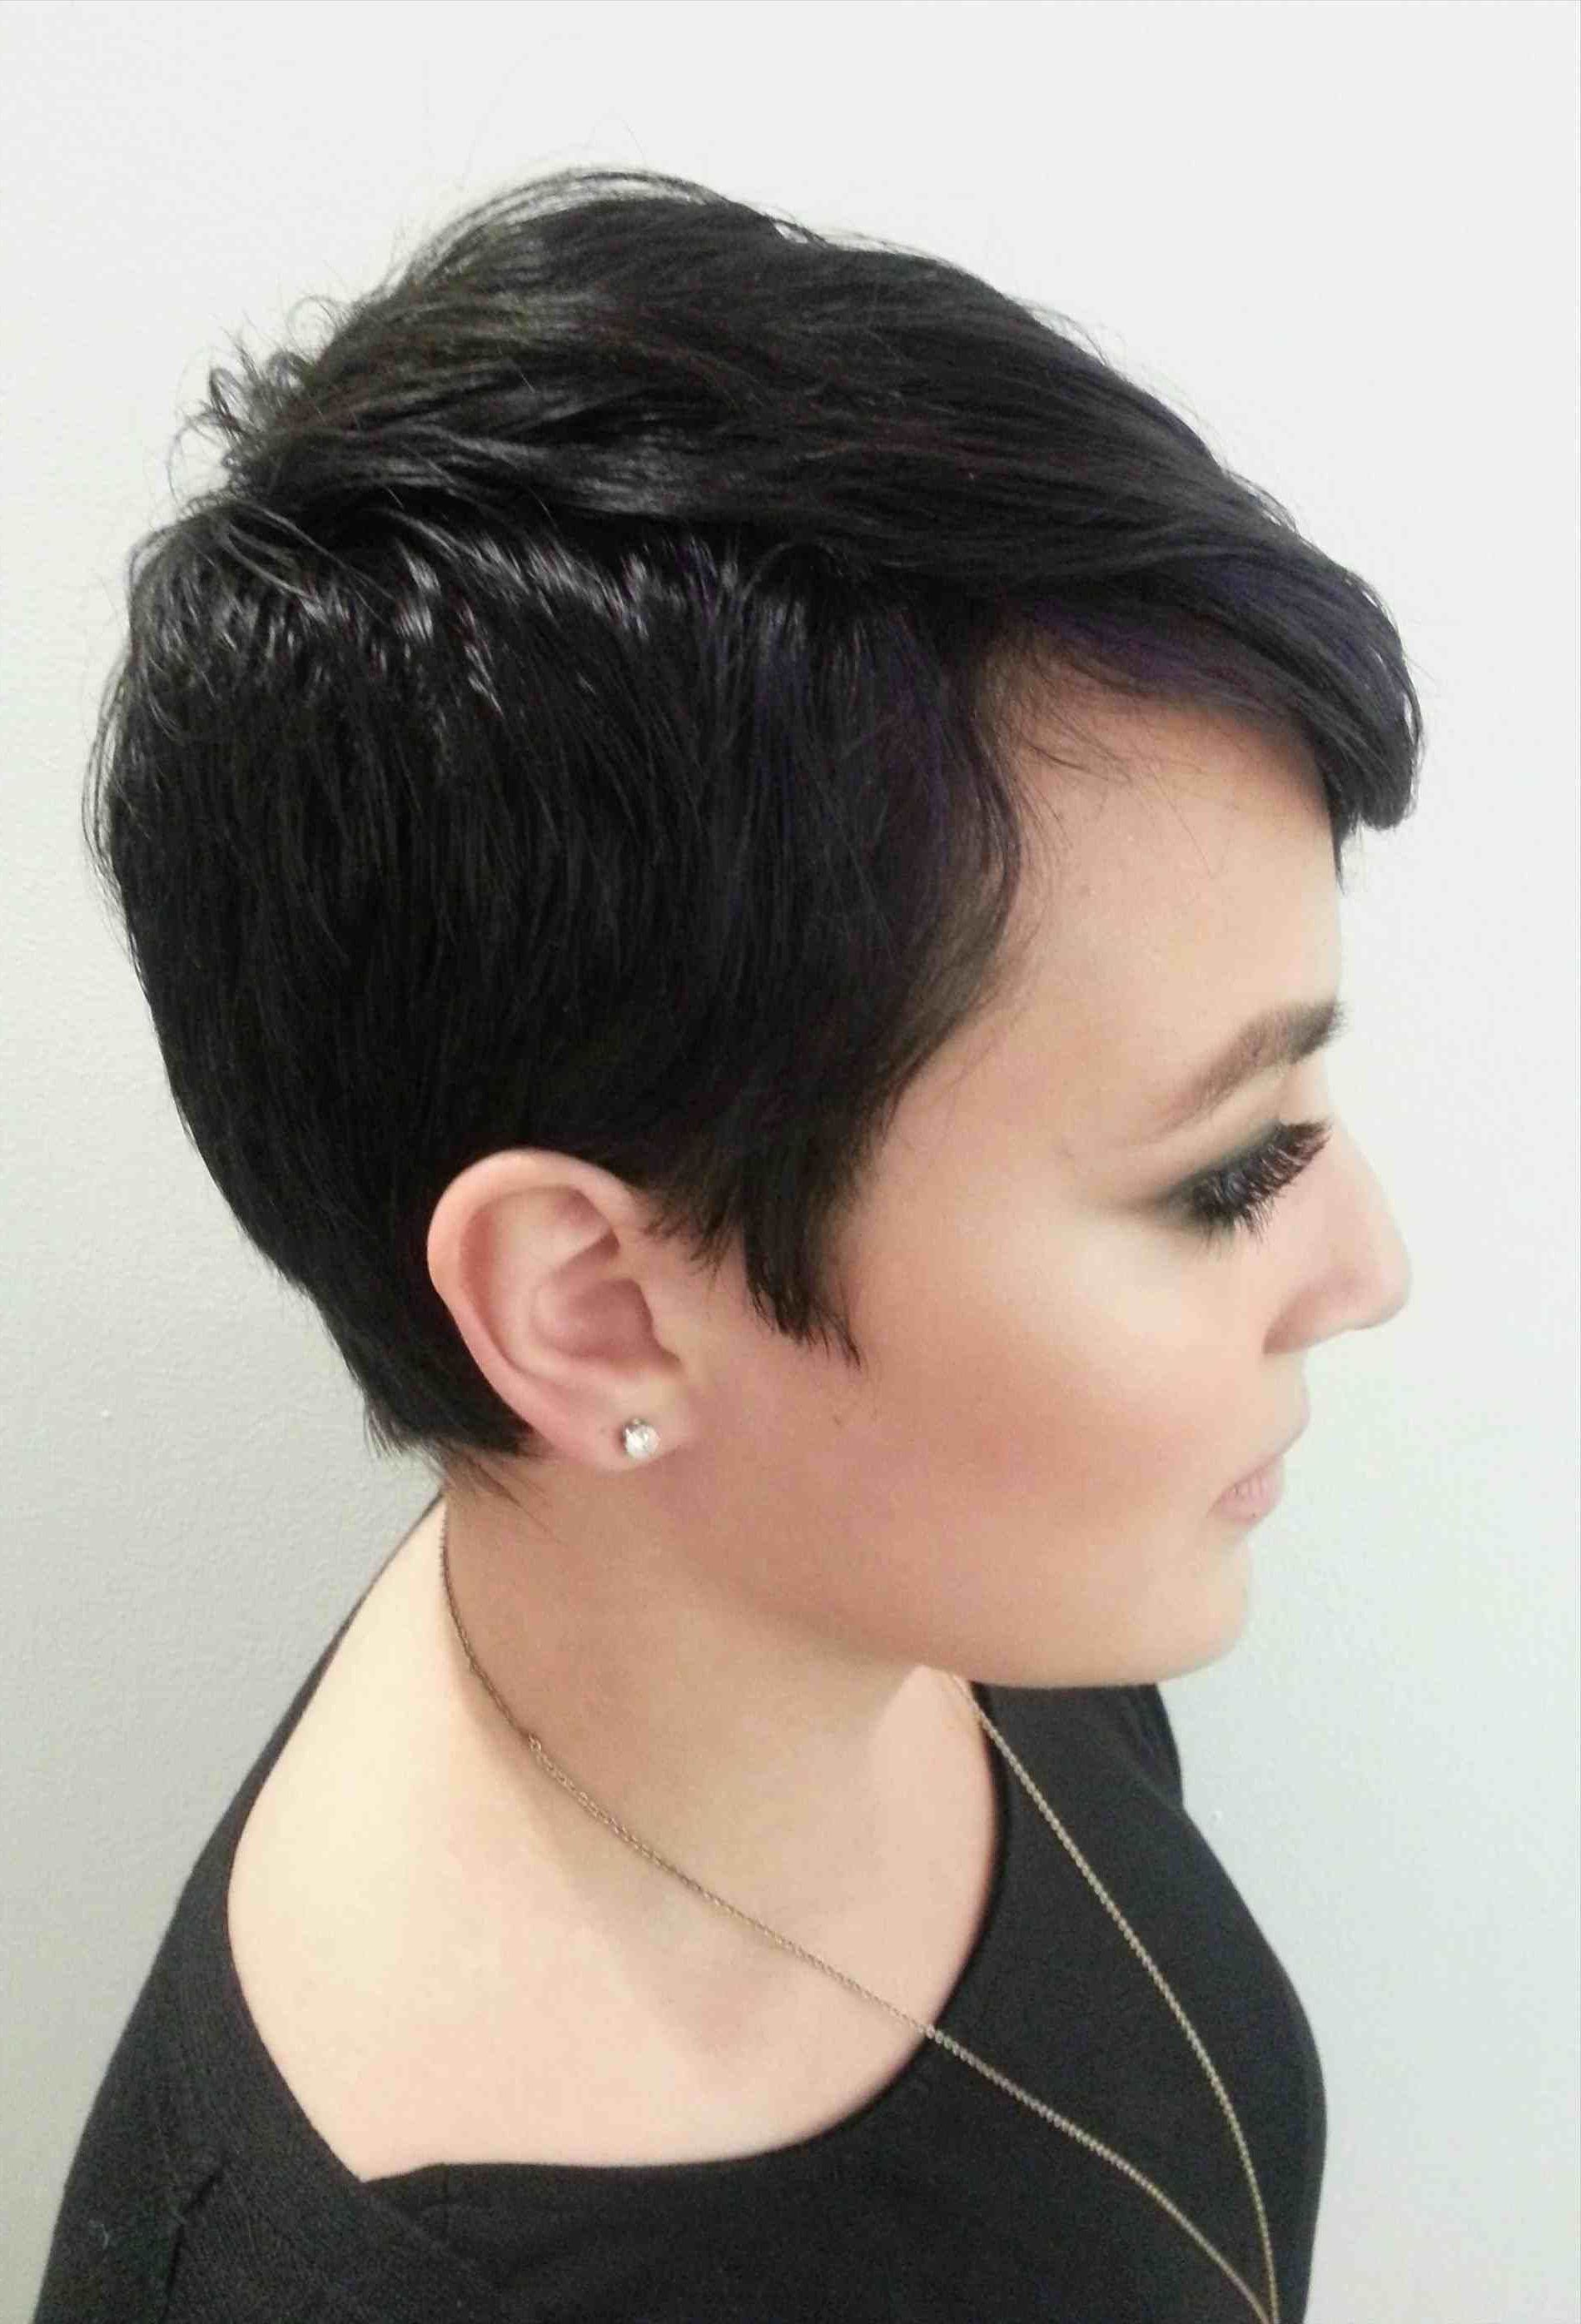 Hair Pixie Oval Faces Short Very Short Haircuts For Thick Hair Pixie For Short Haircut Oval Face (View 7 of 25)